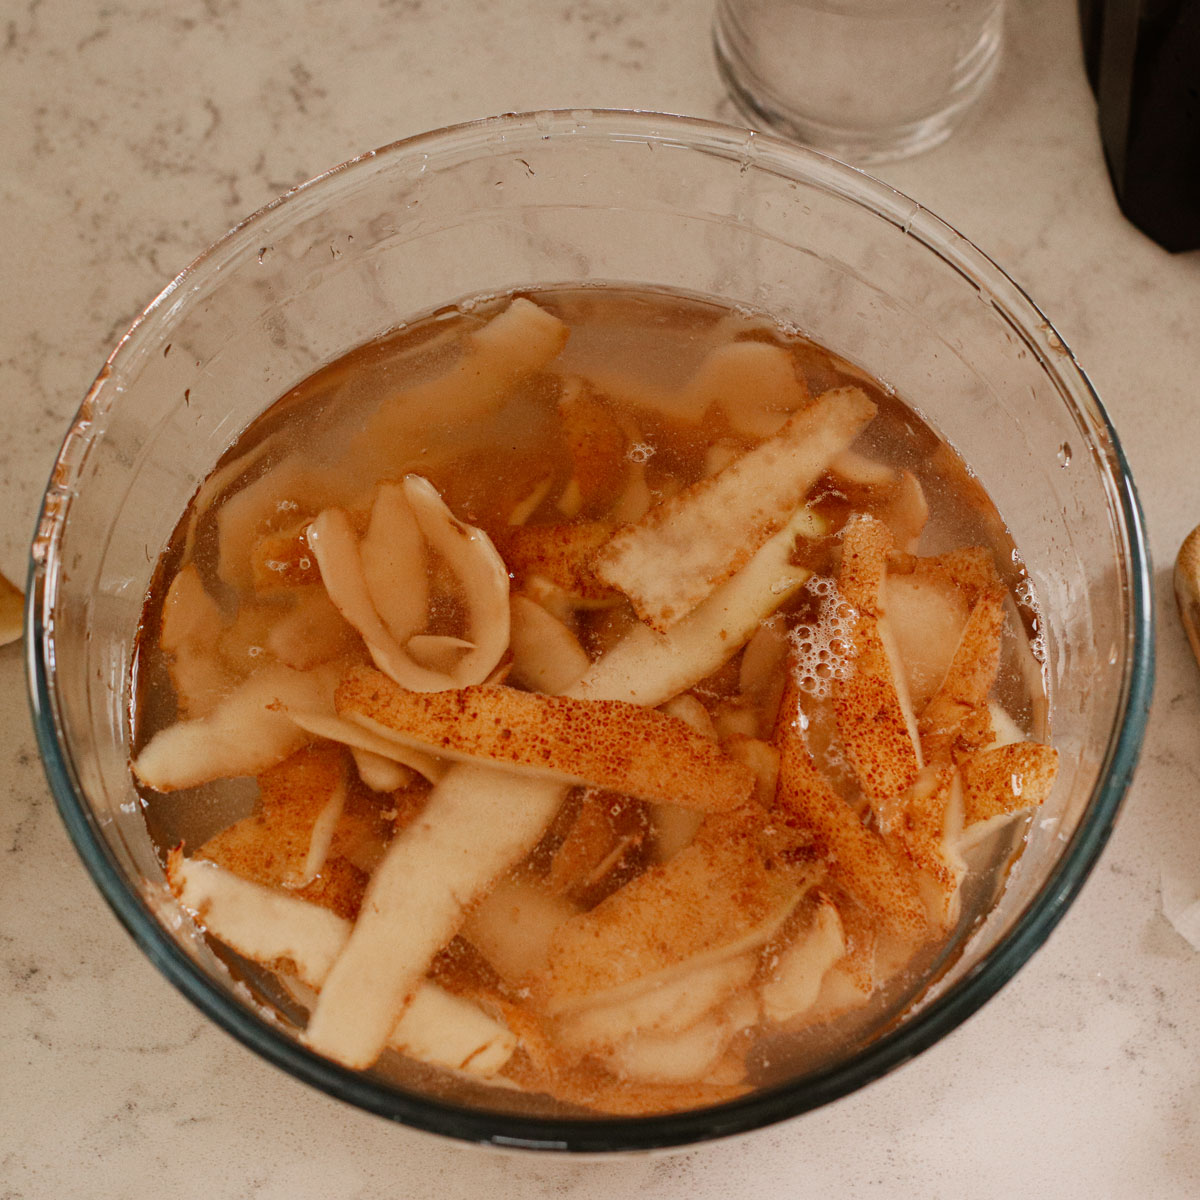 Potato peels soaked in cold water.